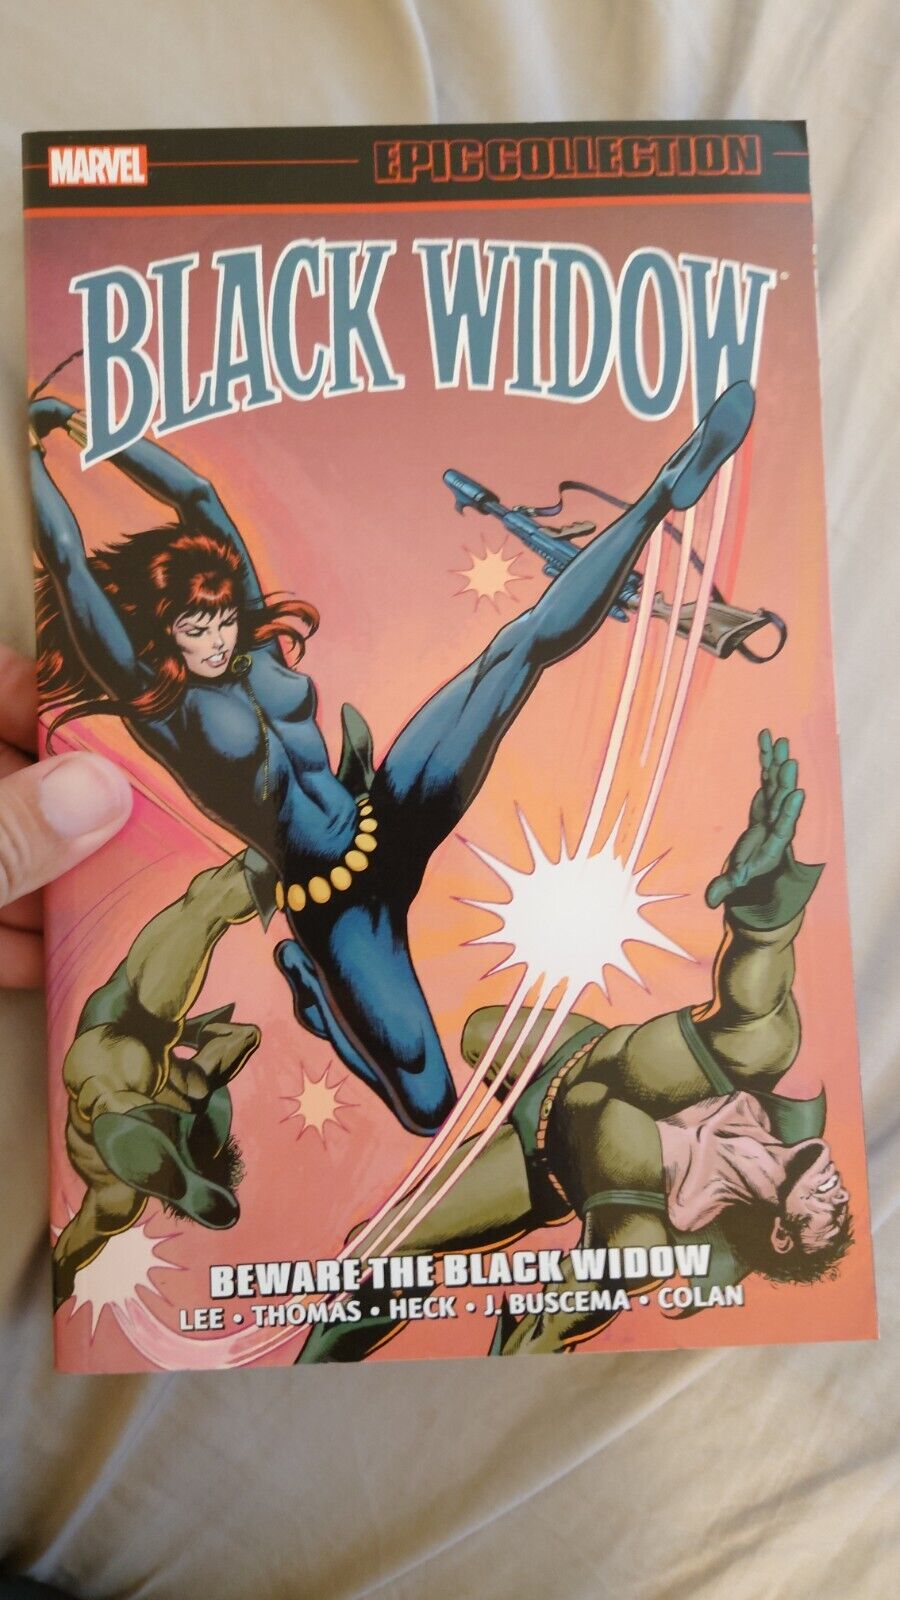 Black Widow Epic Collection Vol 1.  (Marvel, 2019) Very Good Condition